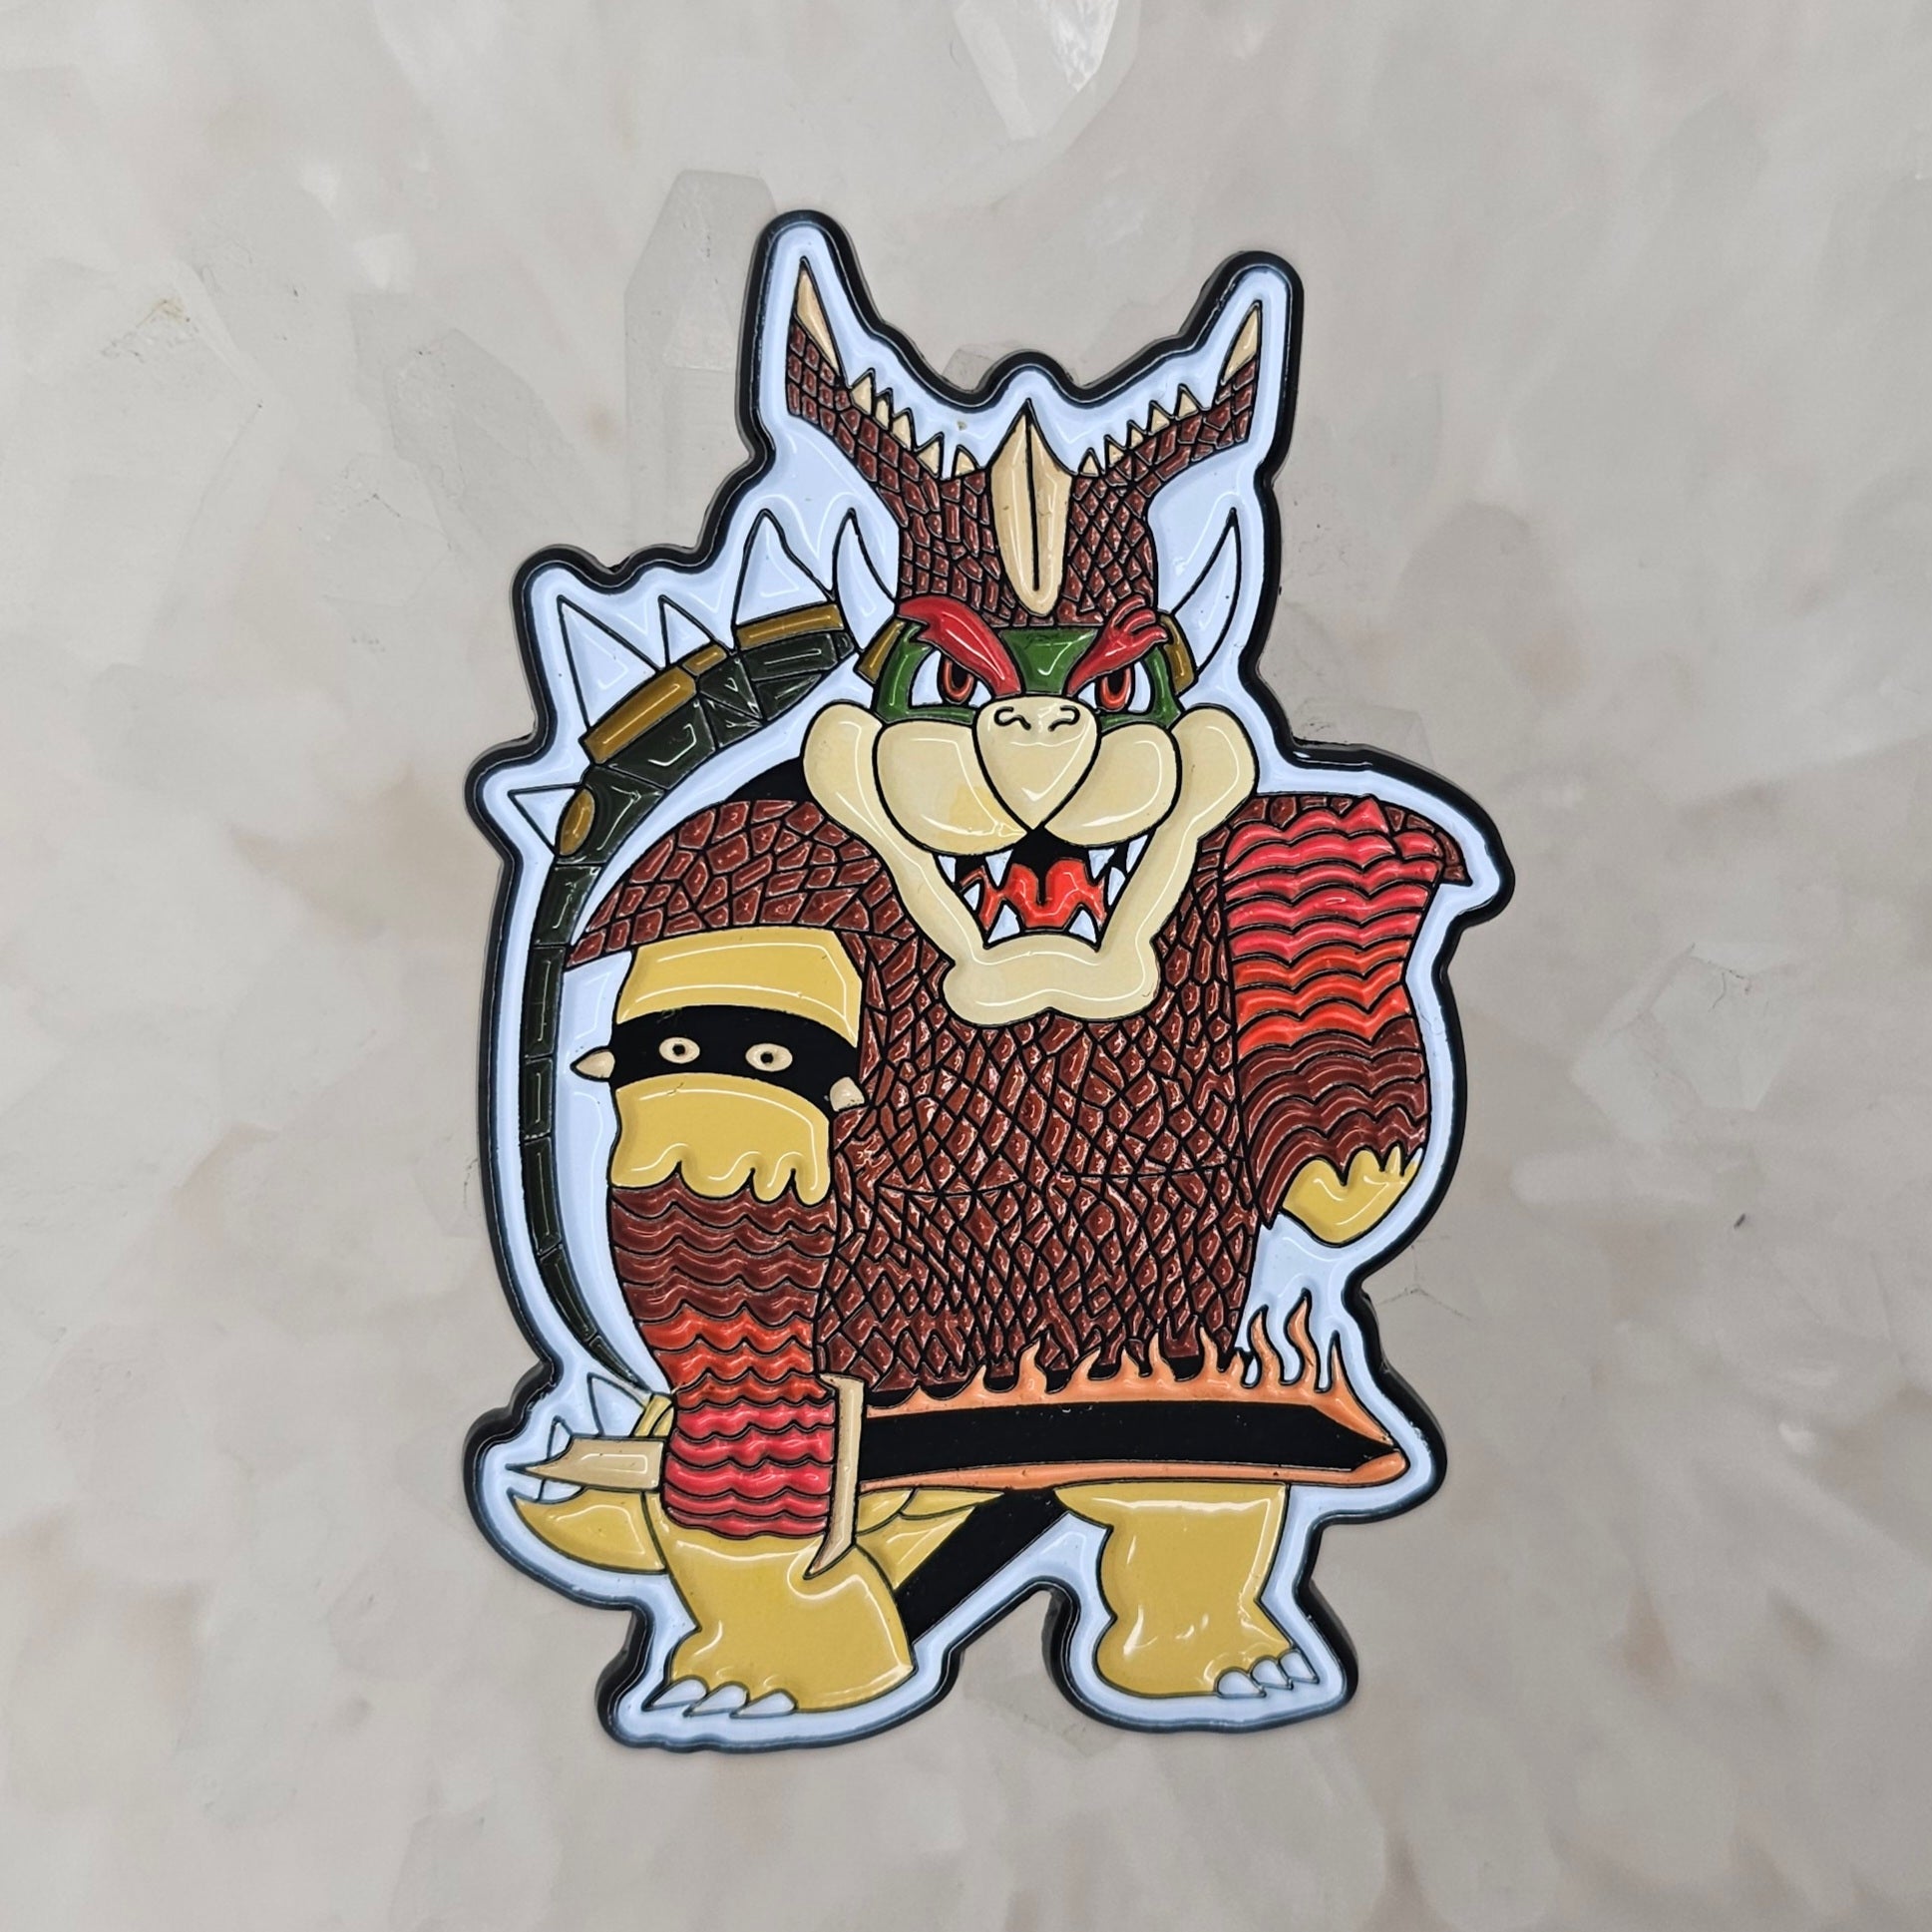 Death Knight Bowser Warrior Mario Super Dungeon Bros Board Video Game Mashup Dragon Fantasy Roleplaying Game Enamel Pins Hat Pins Lapel Pin Brooch Badge Festival Pin